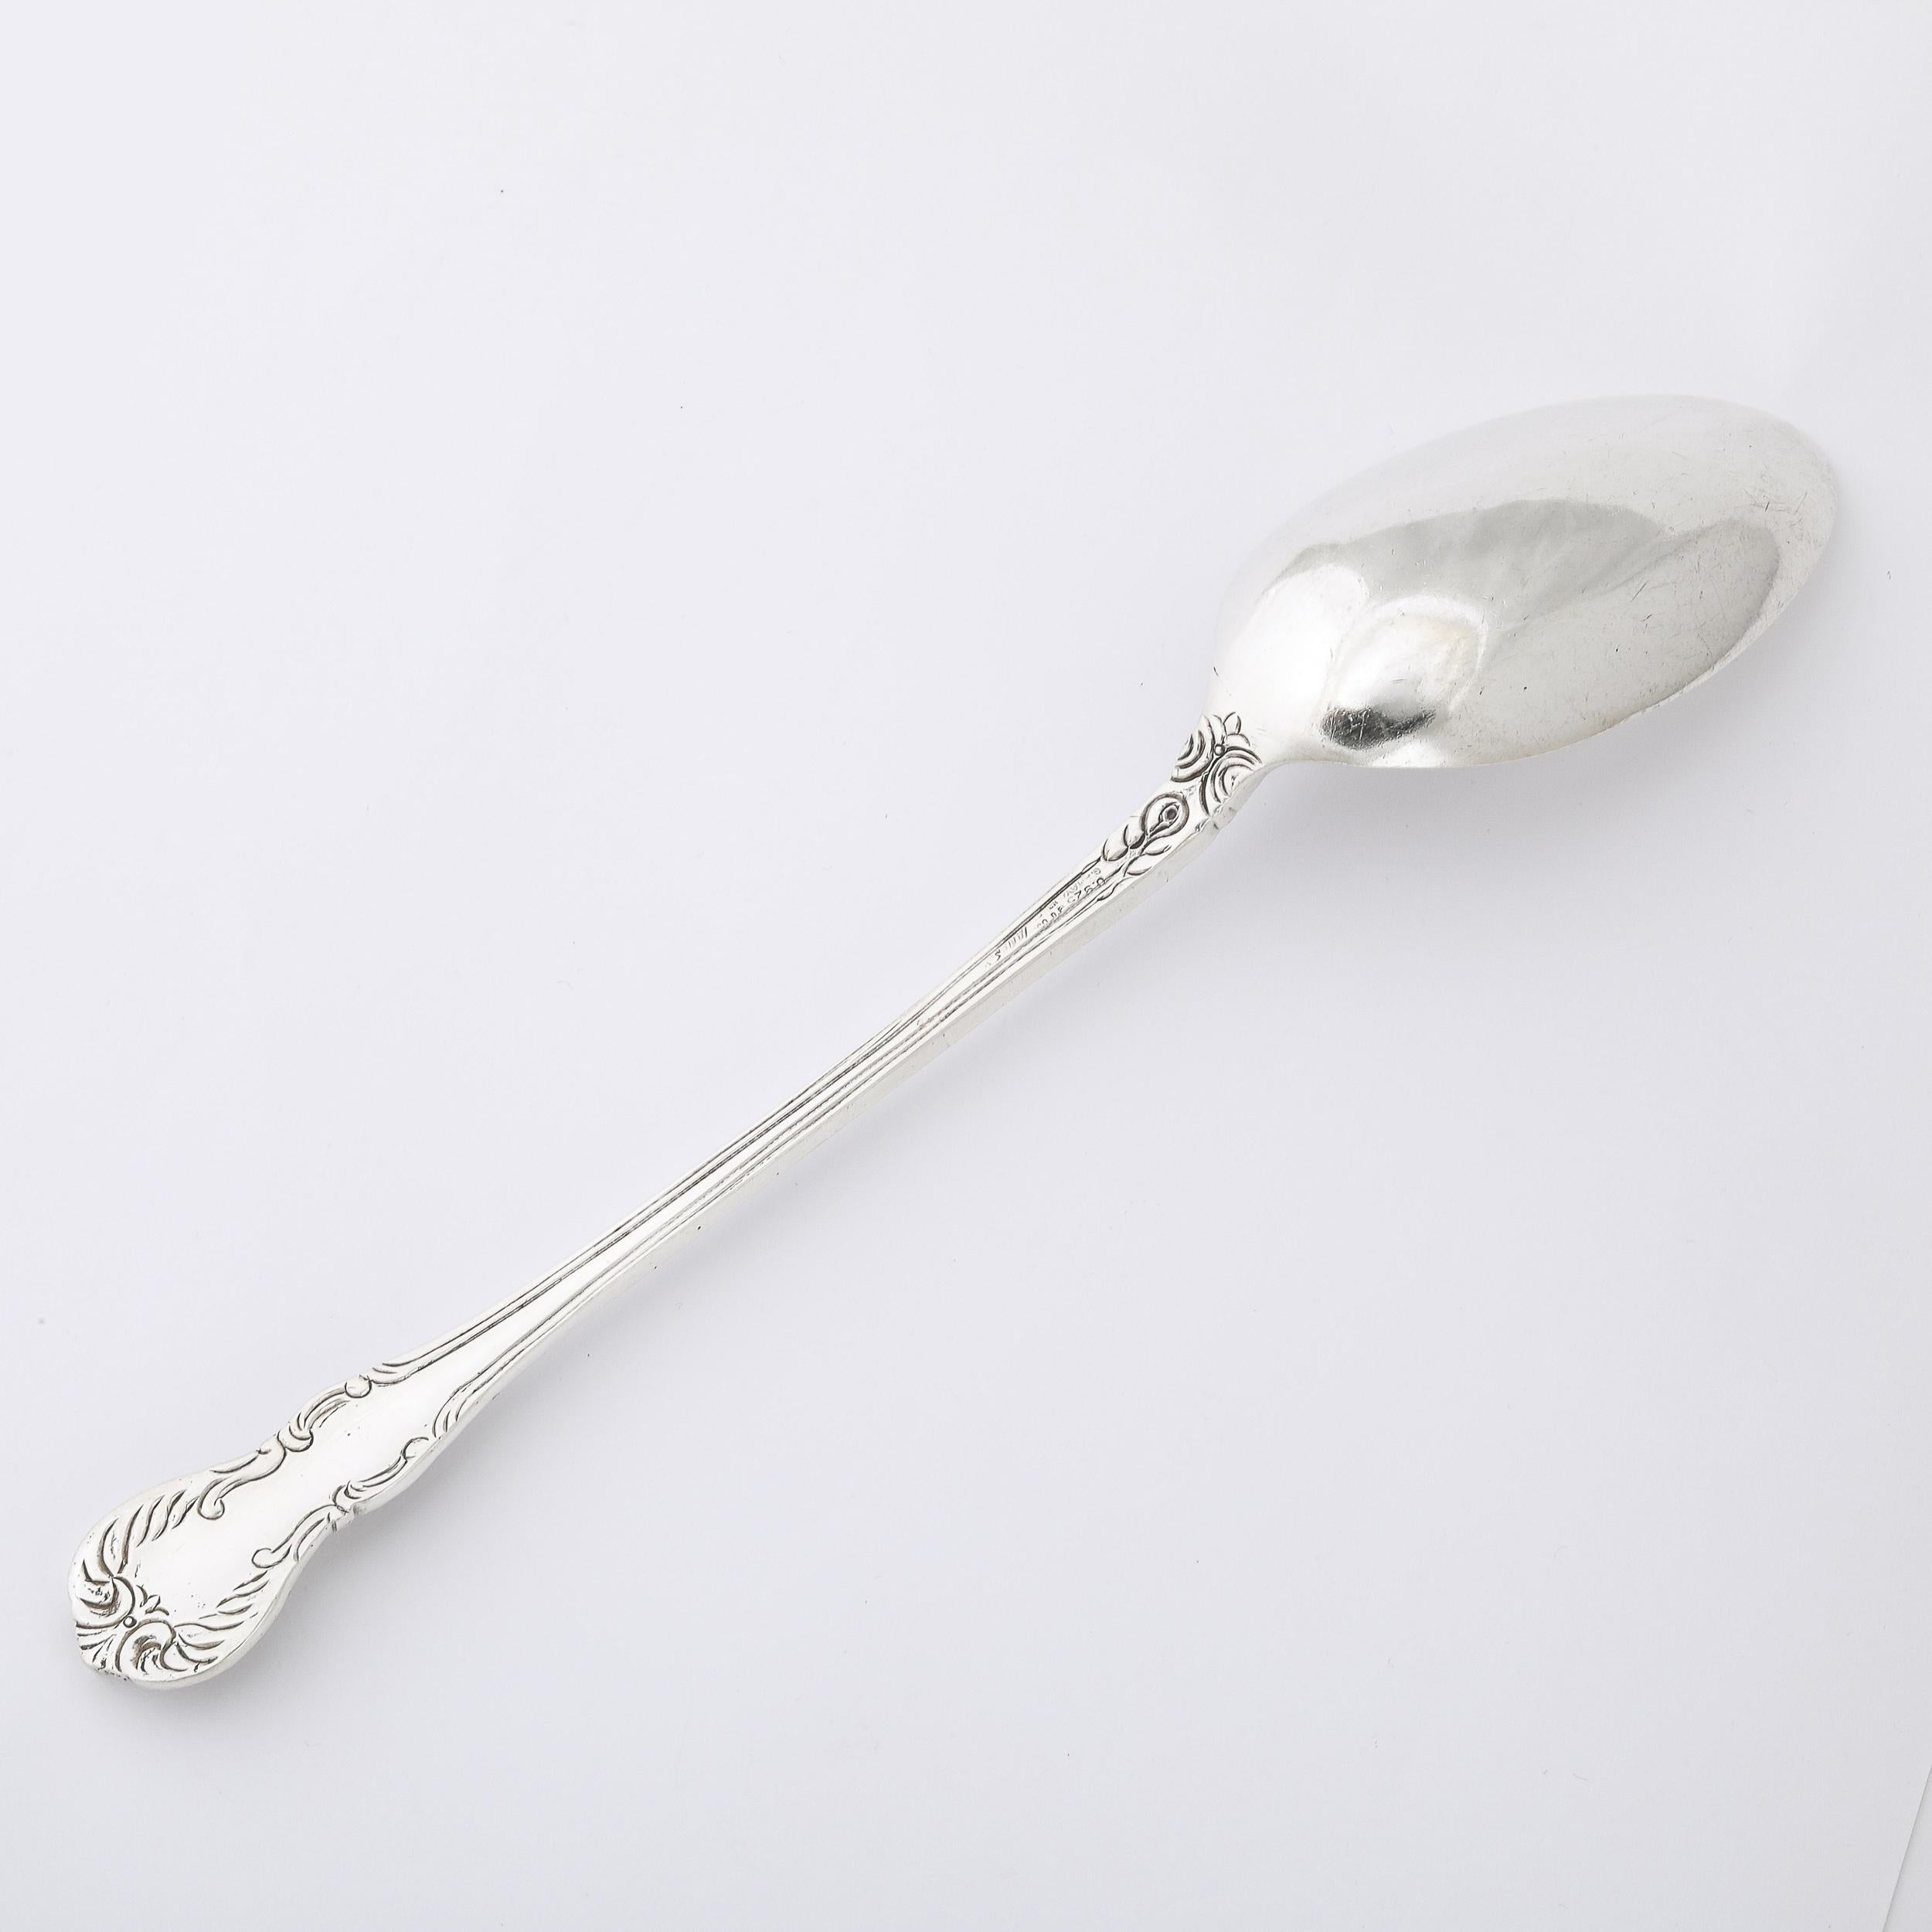 Mid-Century Modernist .925 Sterling Silver Serving Spoon Signed G. Amara  For Sale 3